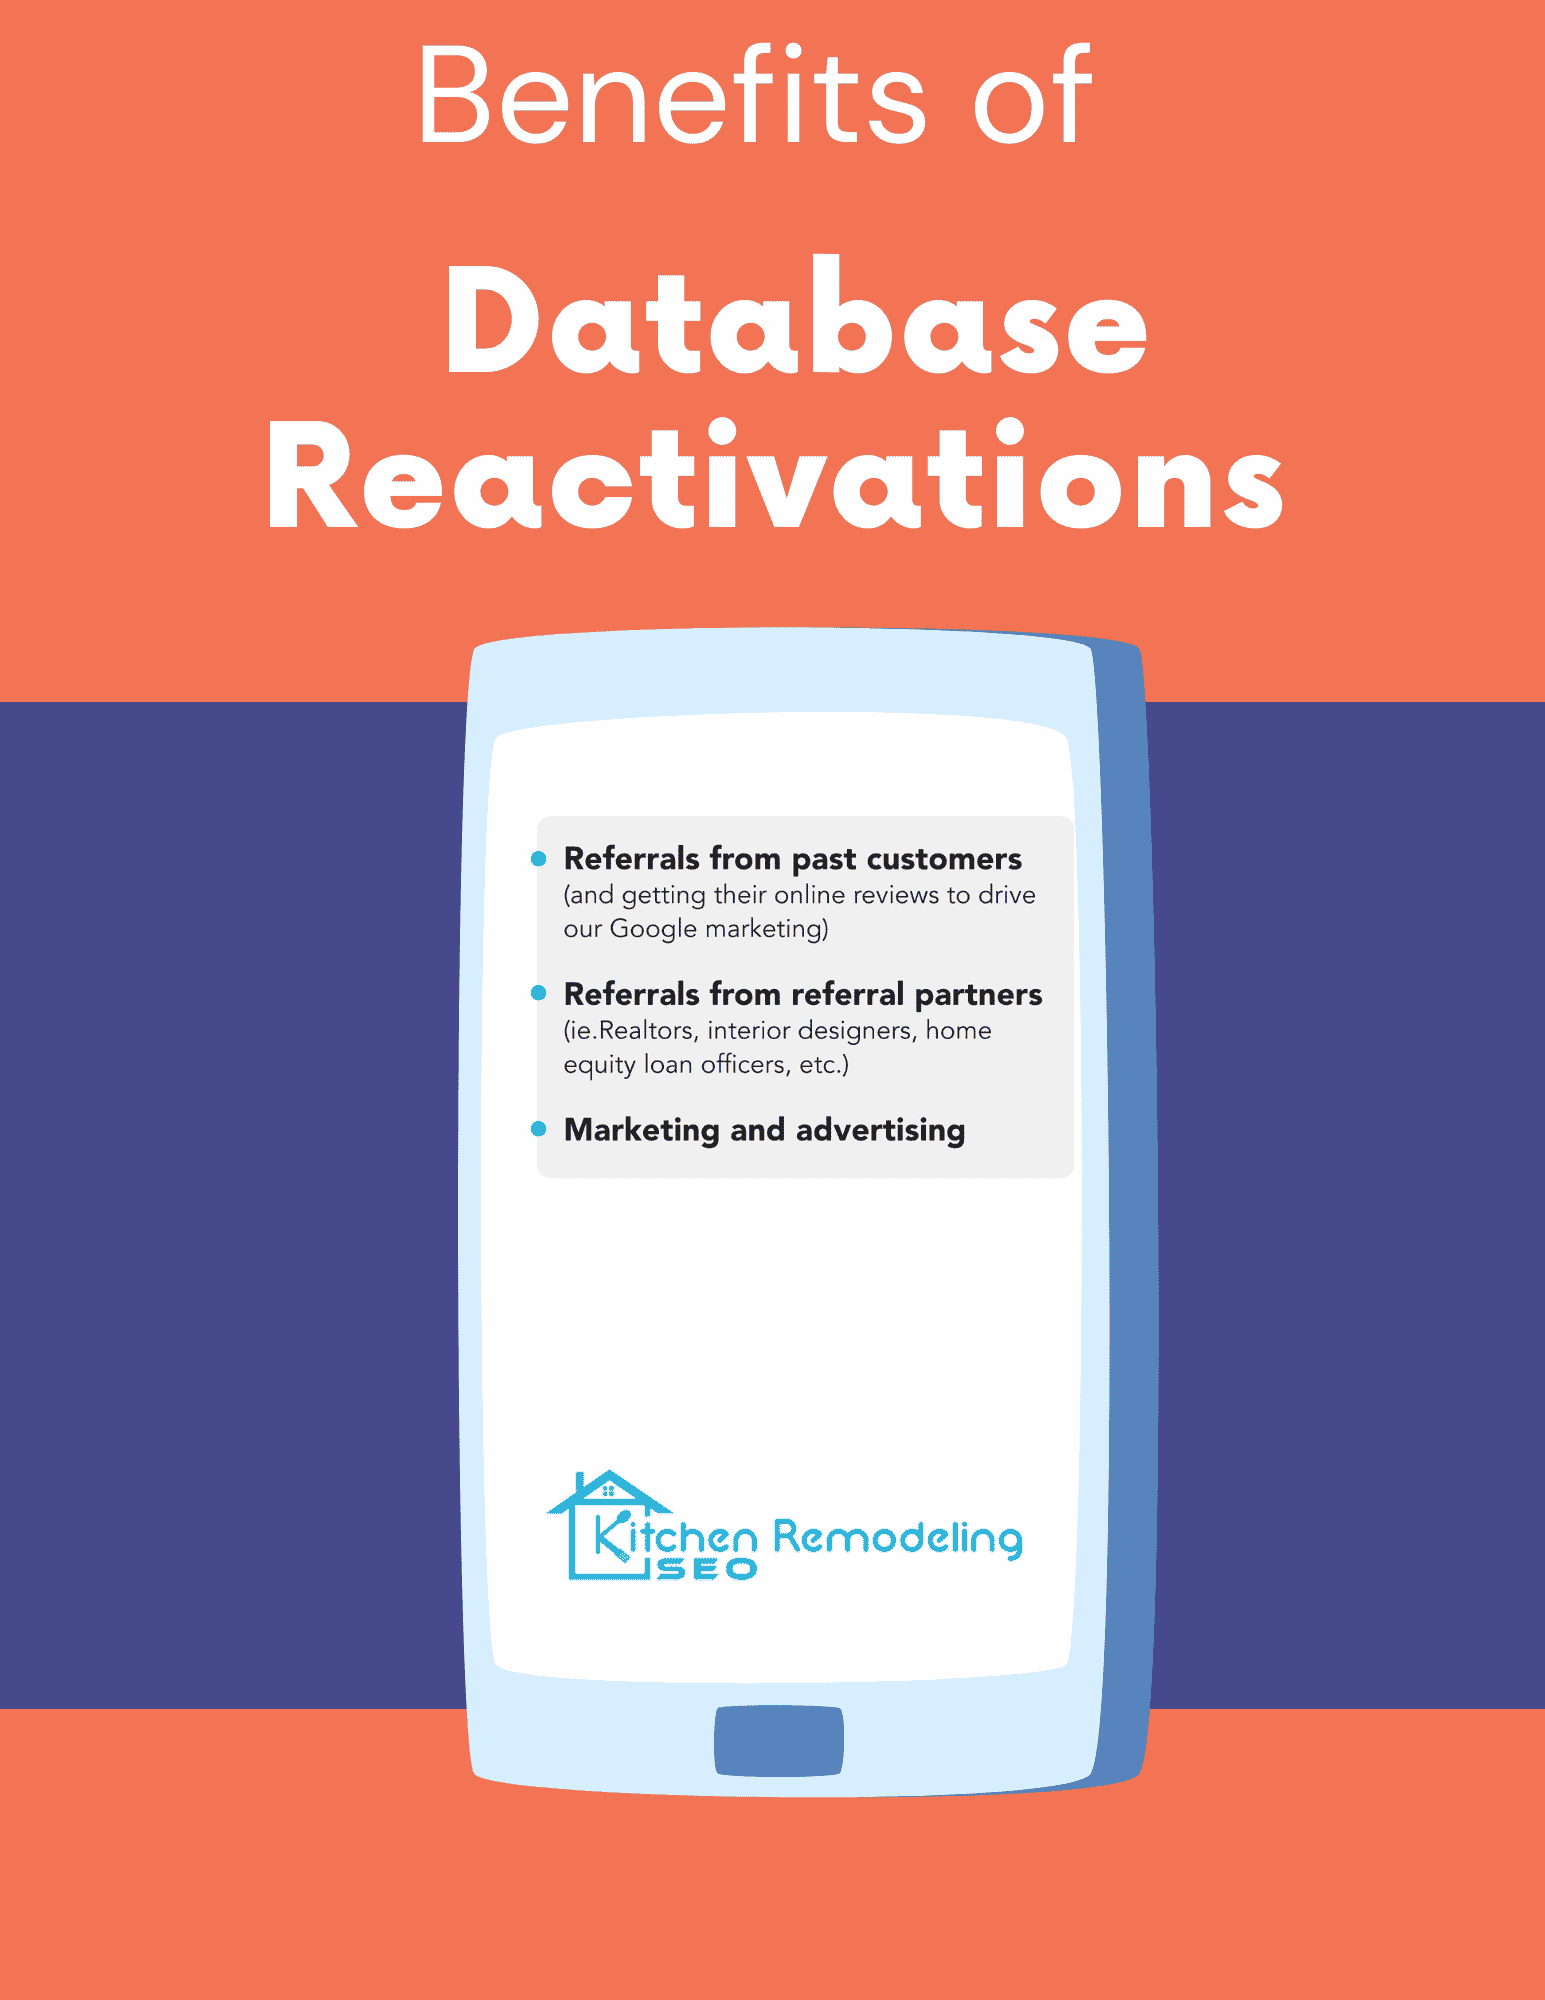 Benefits of a database reactivation campaign